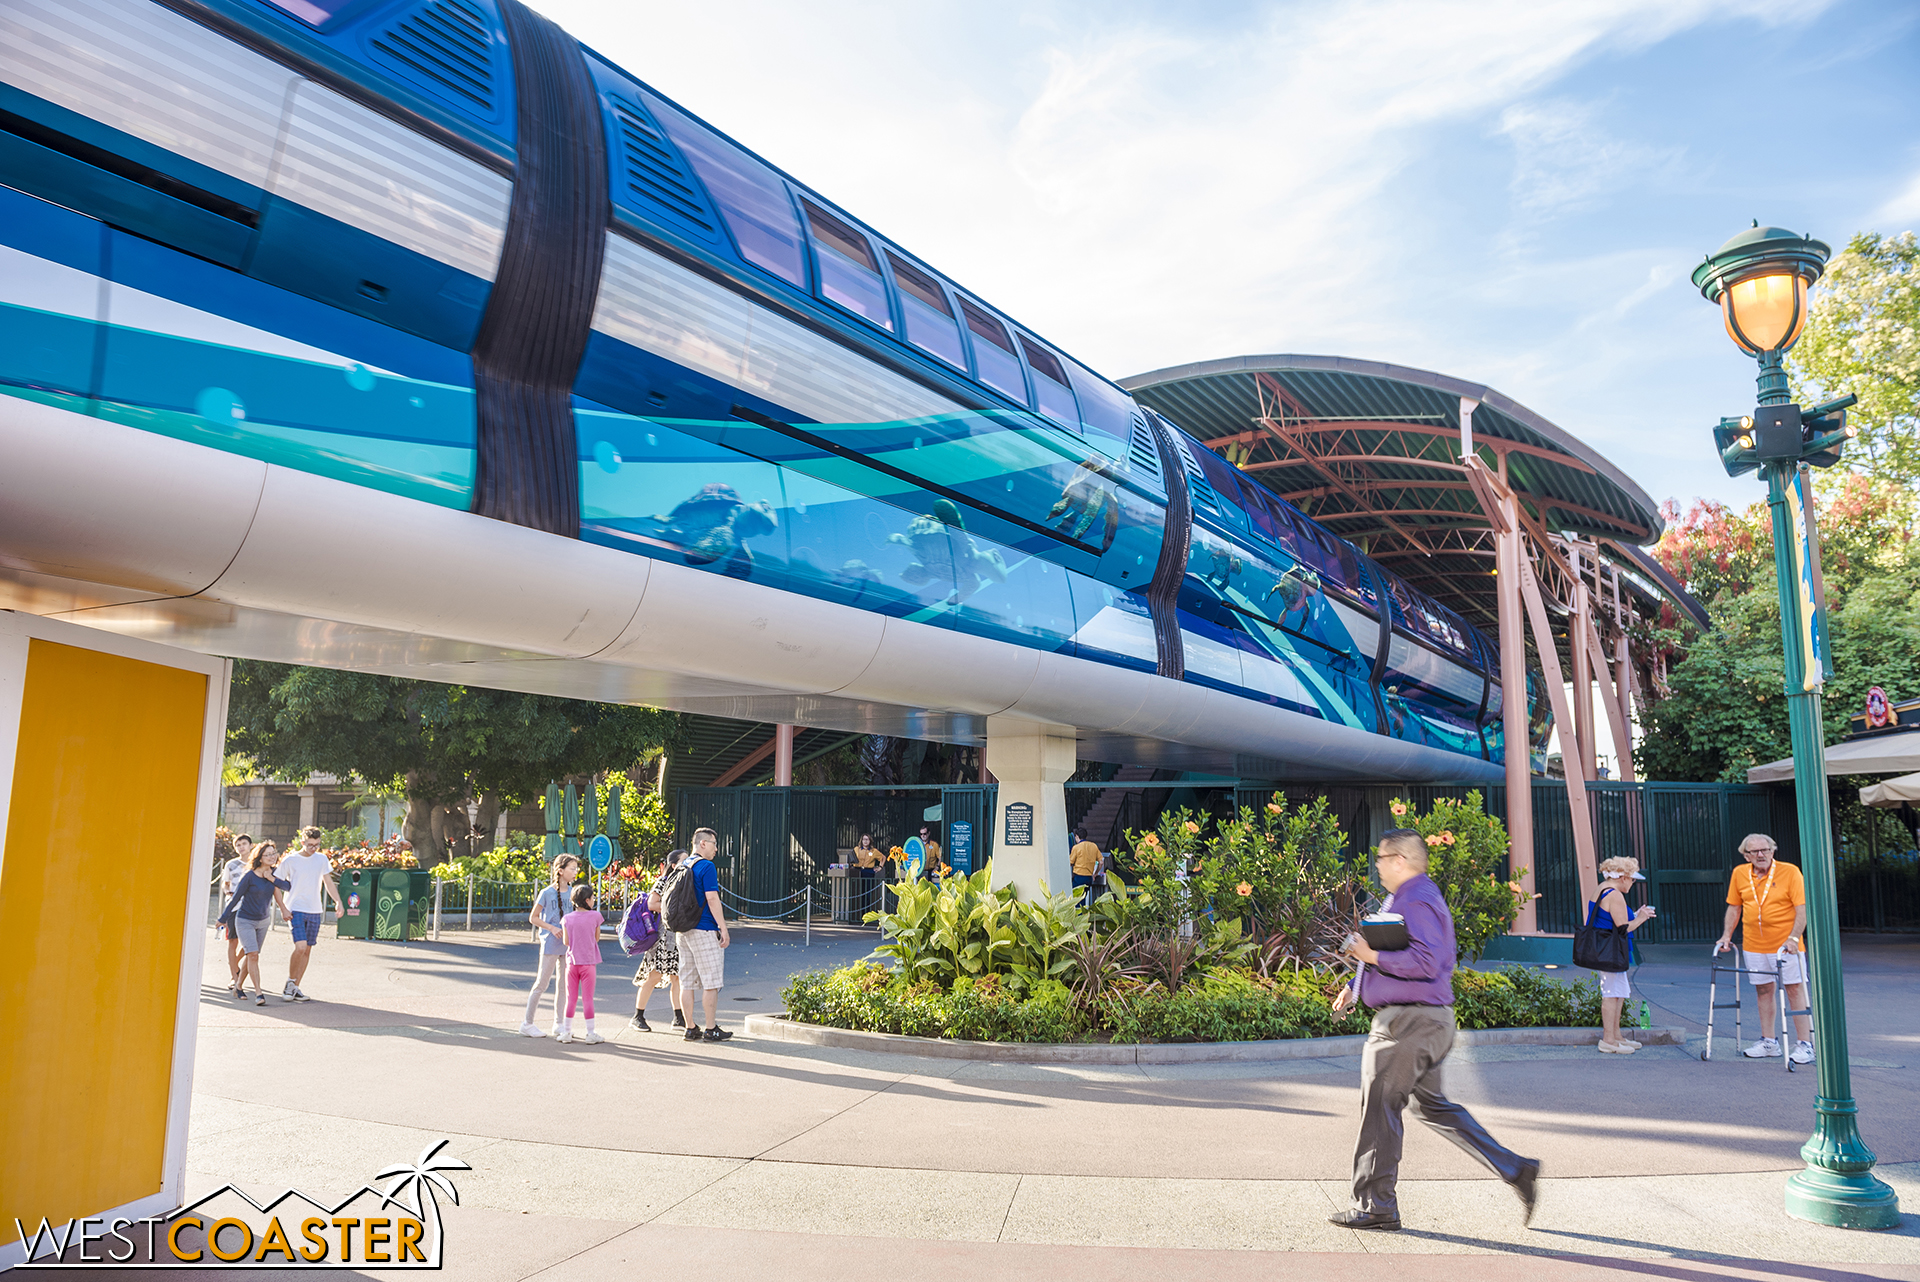  This monorail wrap goes away next week. 